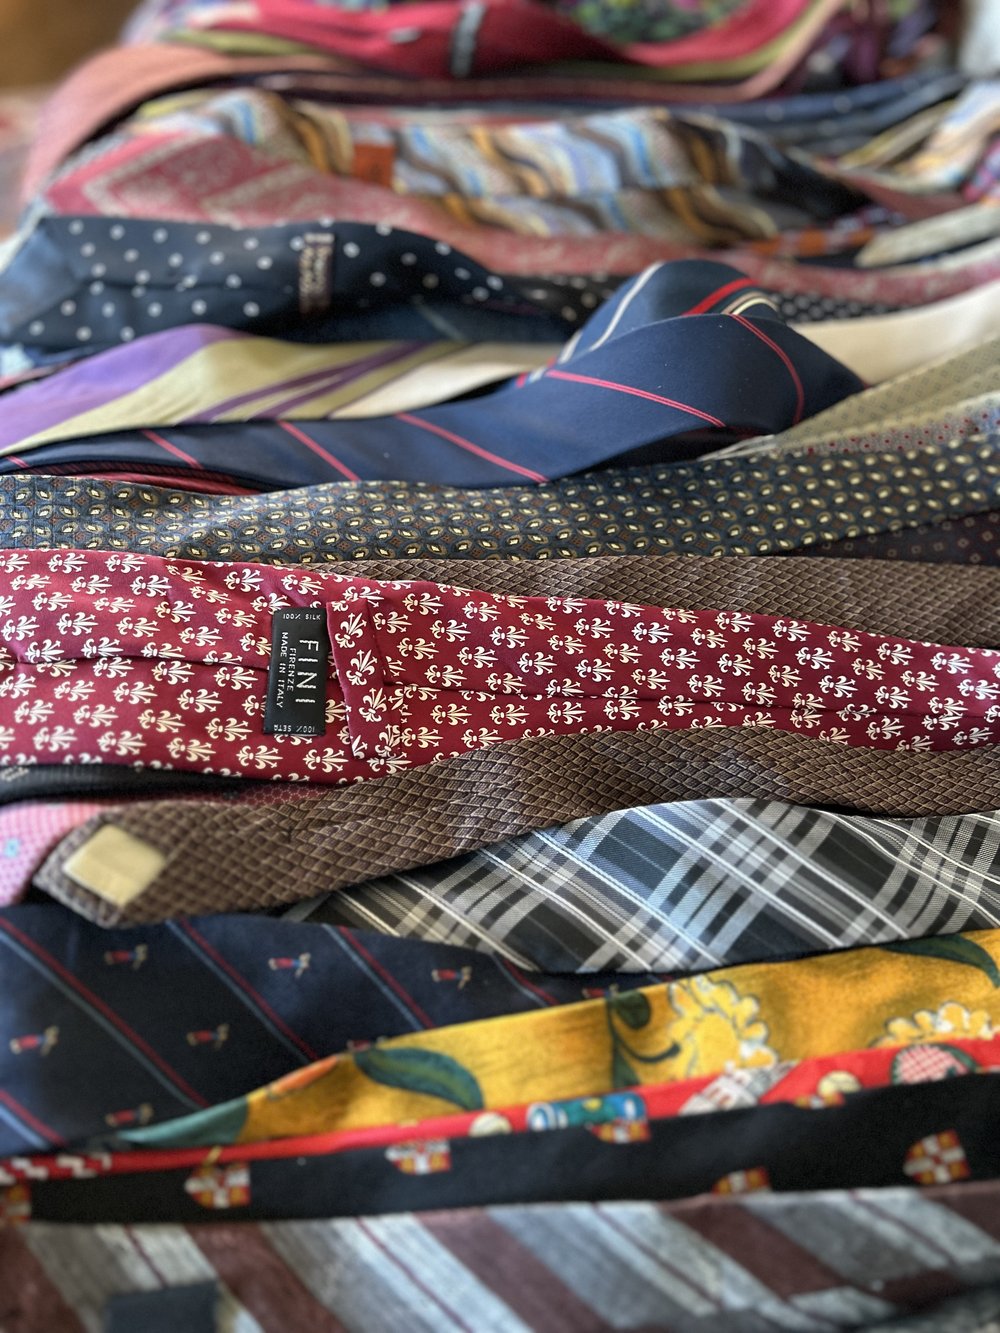 Ties from Peter Kuklinski's Collection